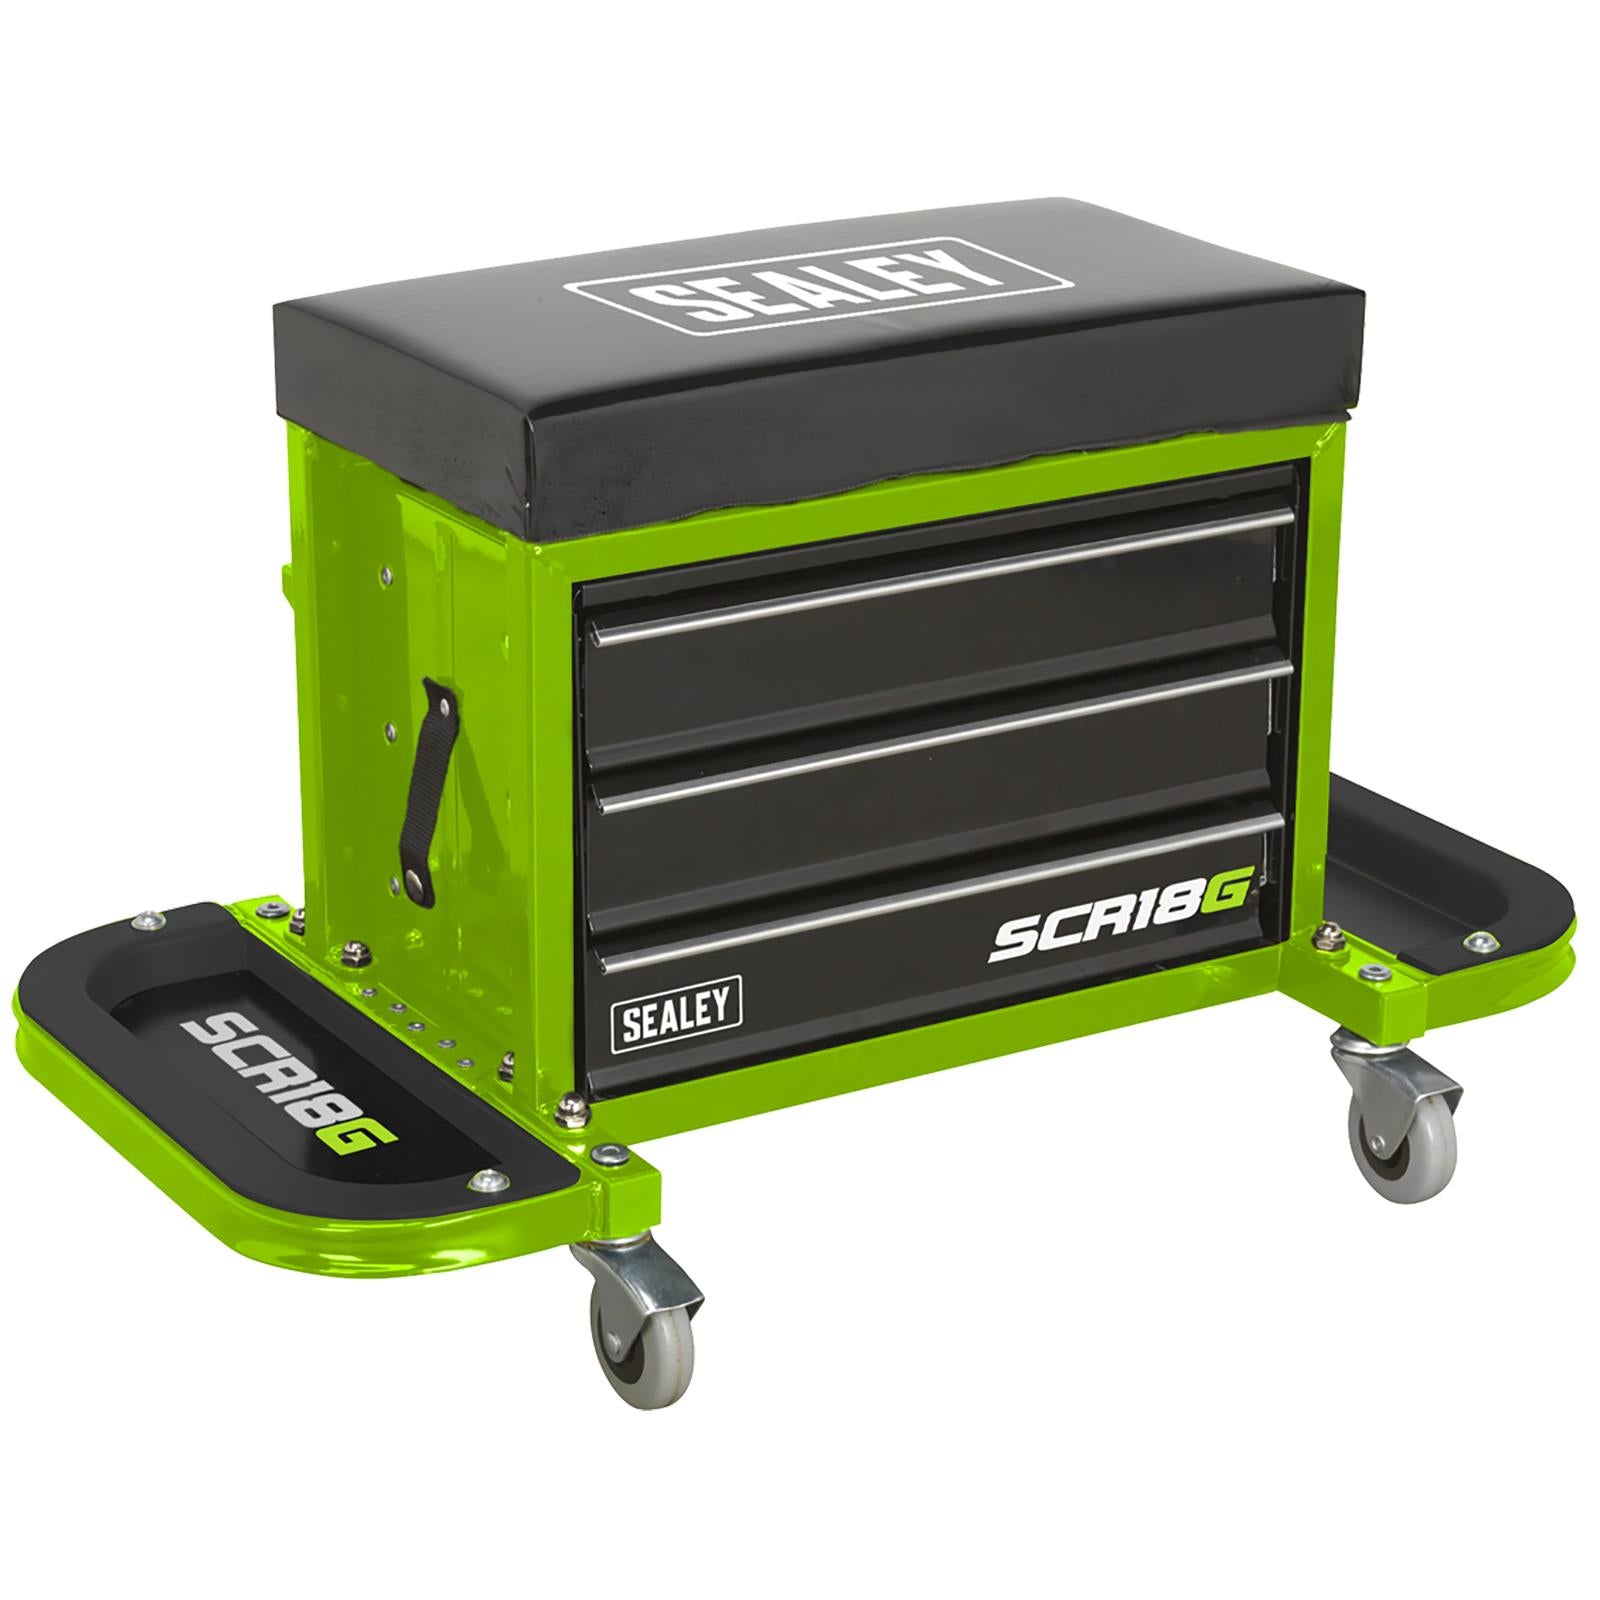 Sealey Mechanics Rolling Utility Seat and Toolbox with Drawers Green